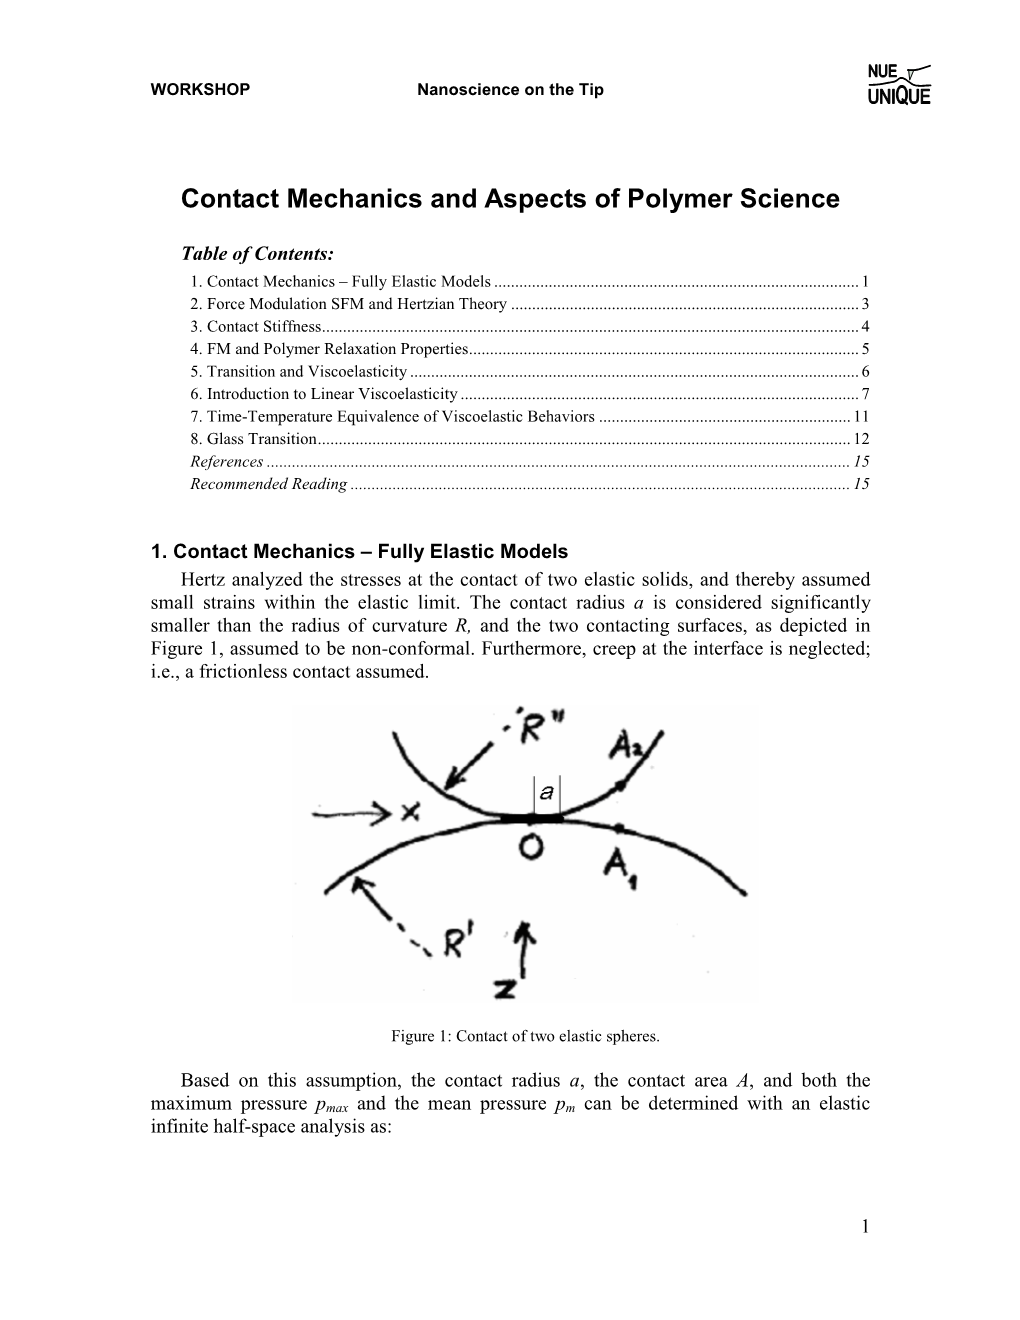 Contact Mechanics and Aspects of Polymer Science